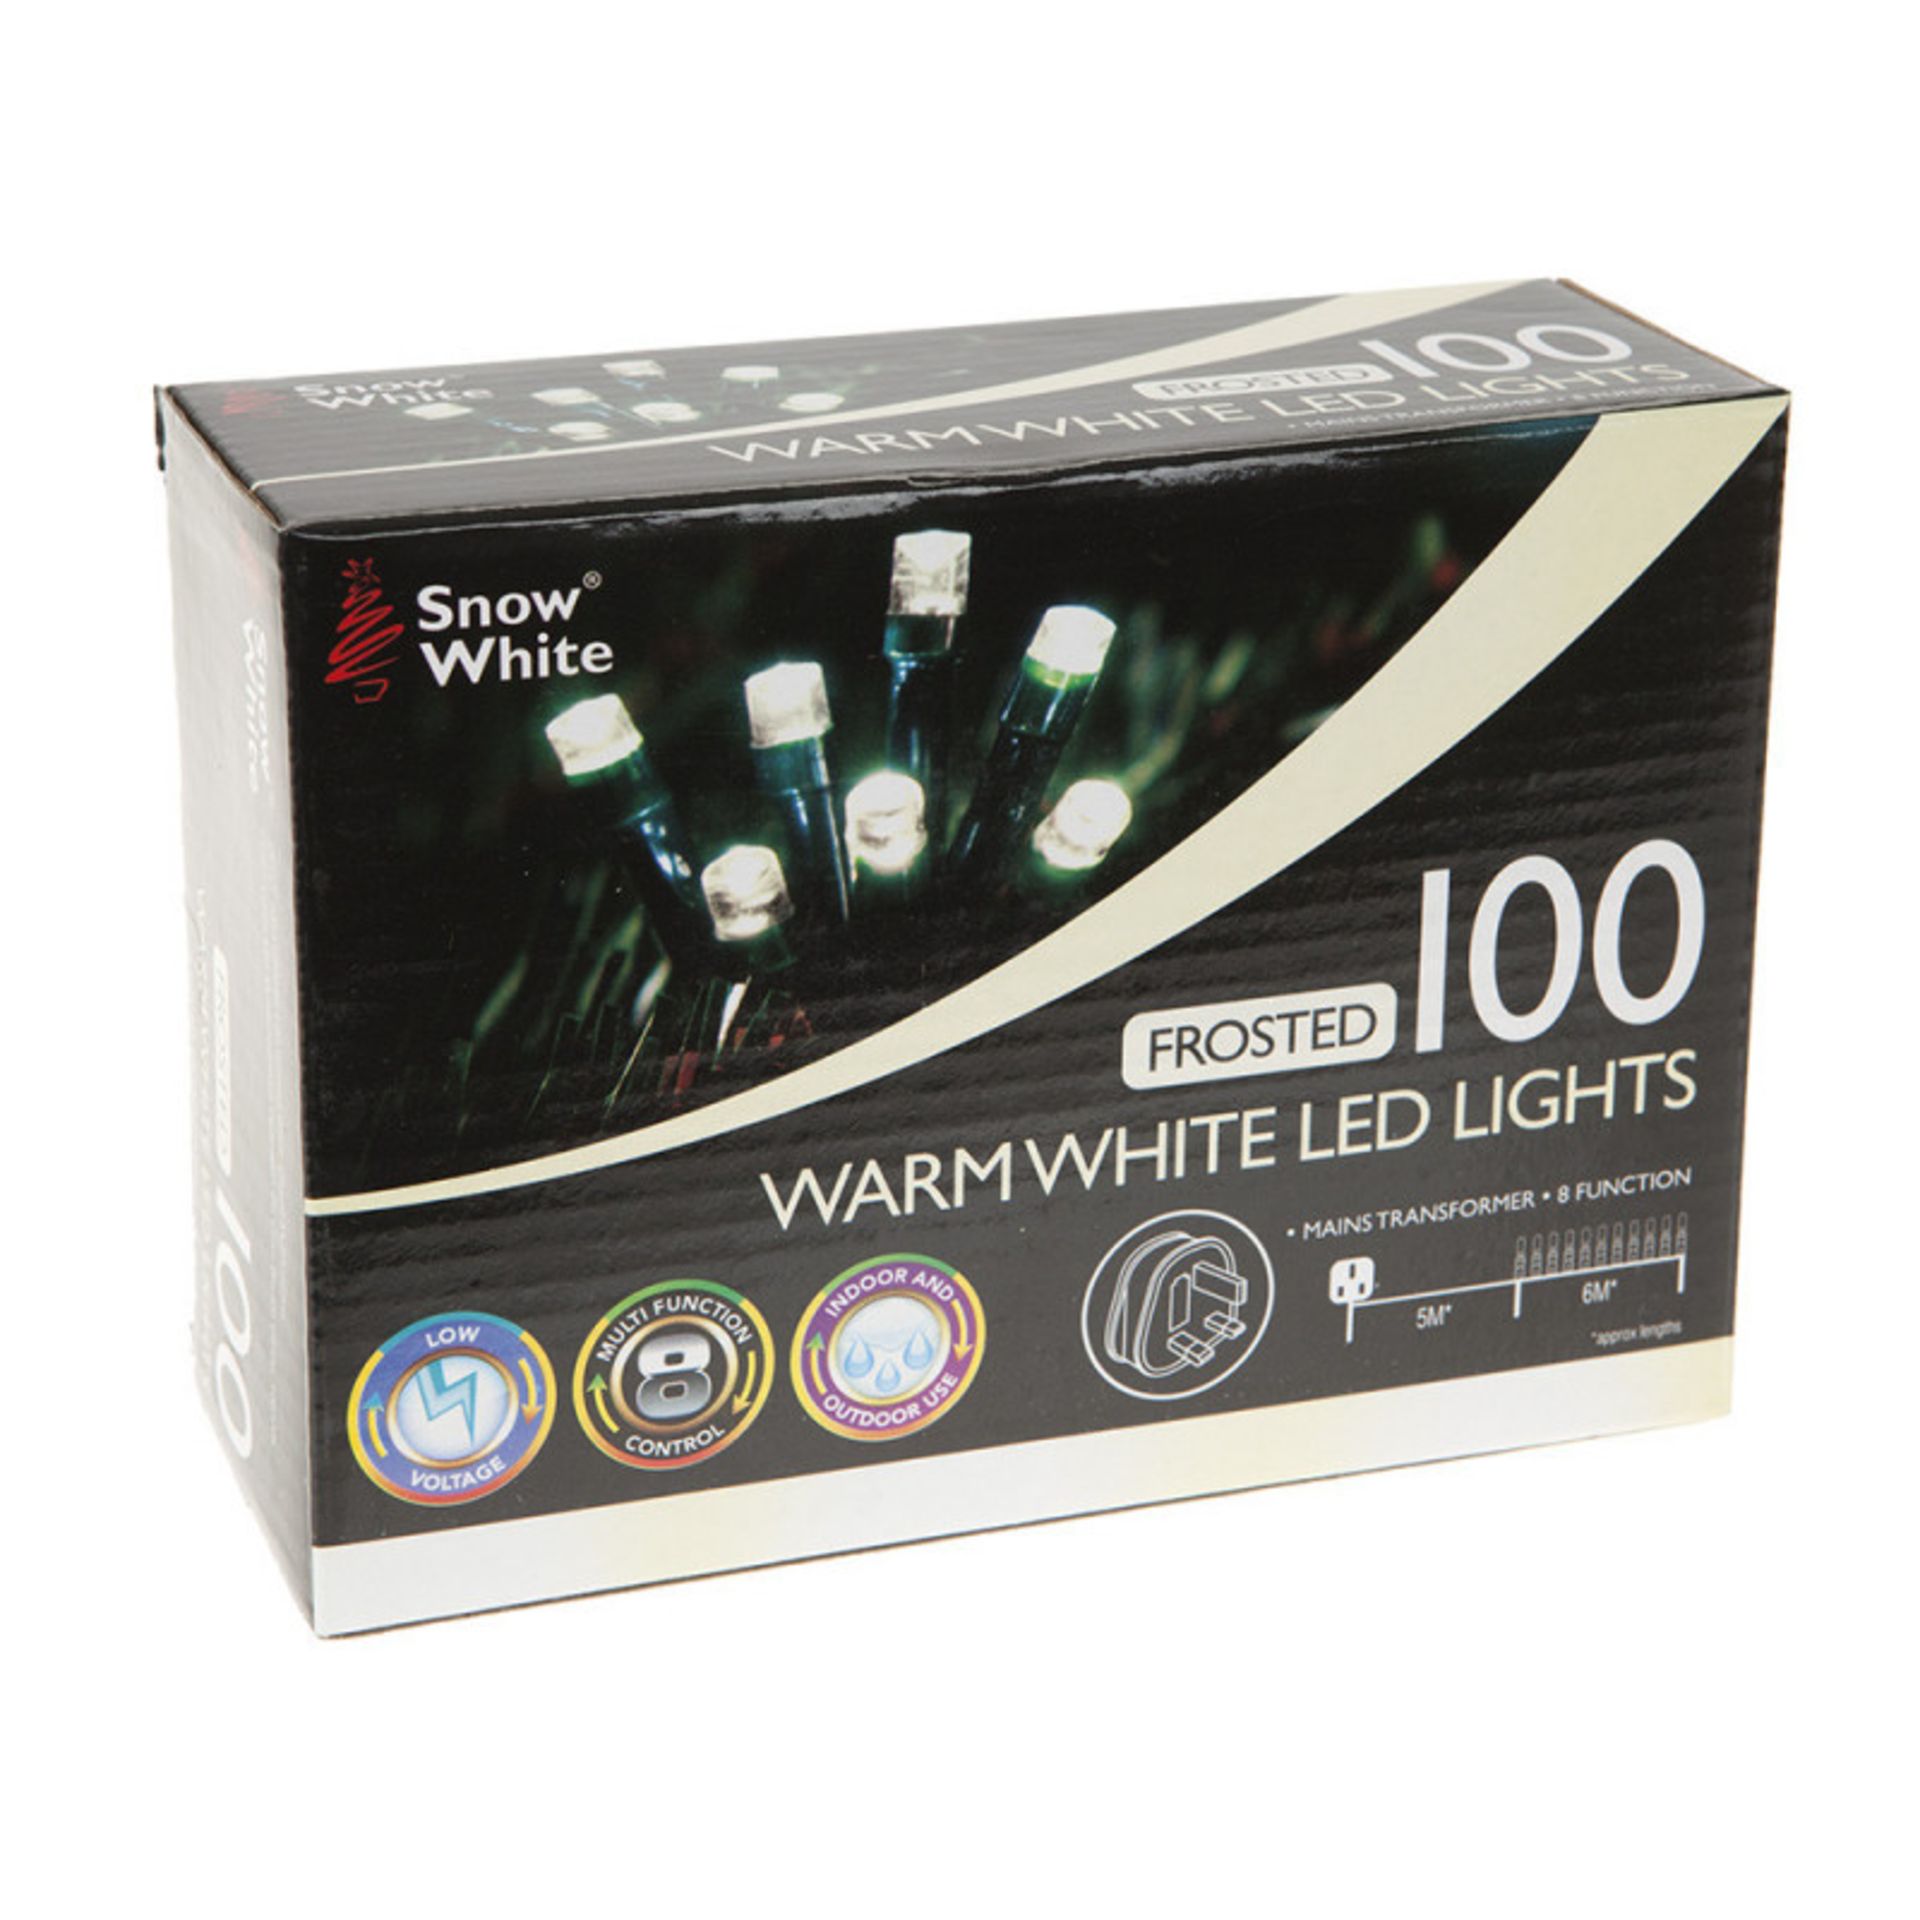 V Brand New 100 Frosted Warm White LED Lights - Mains Transformer - 8 Functions